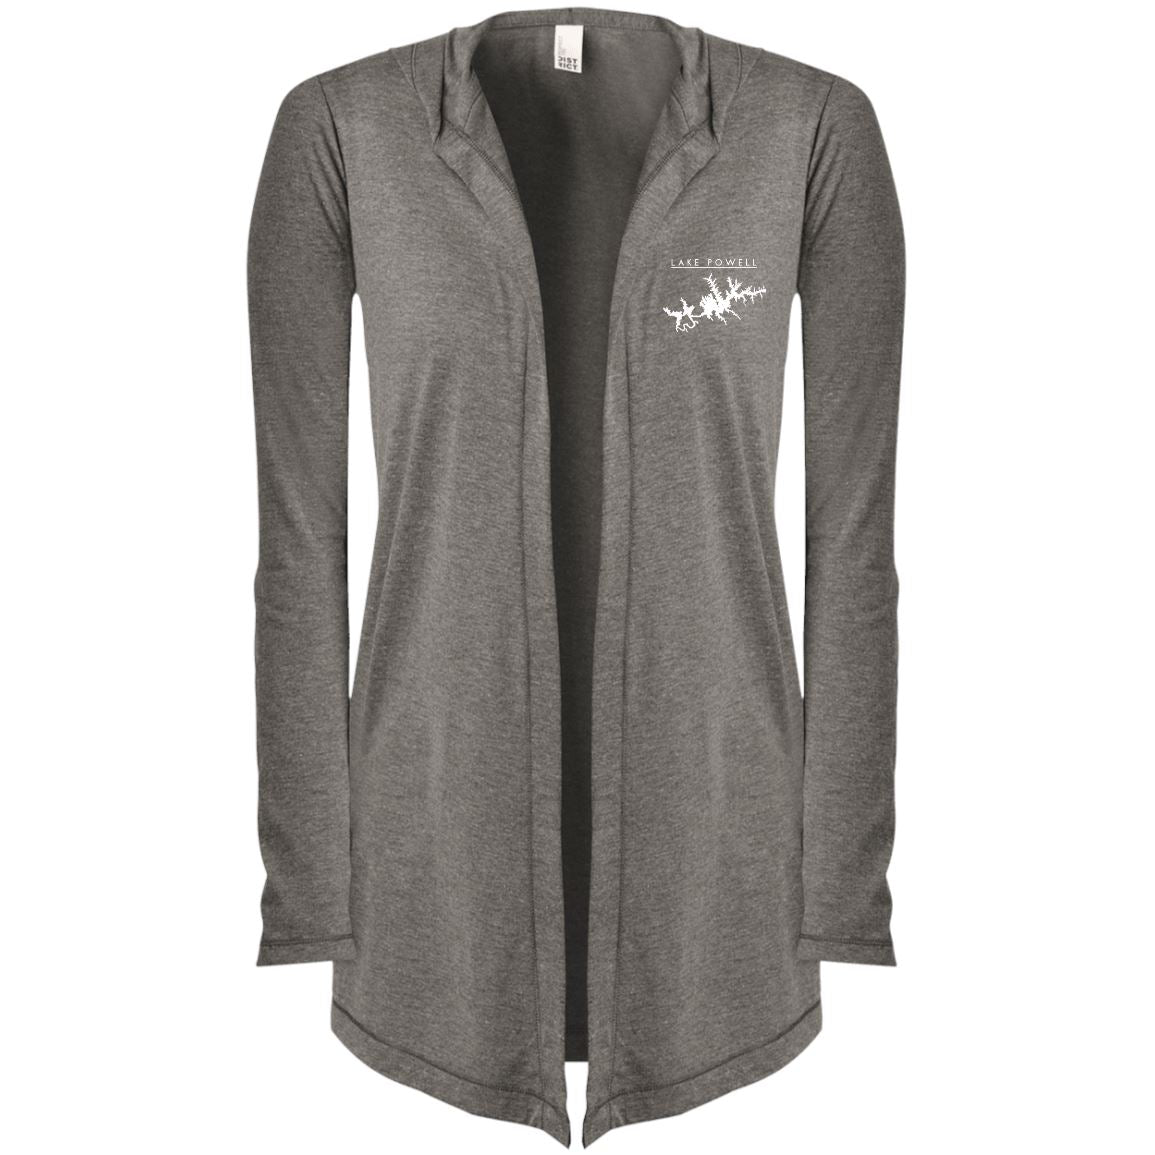 Lake Powell Embroidered Women's Hooded Cardigan - Houseboat Kings